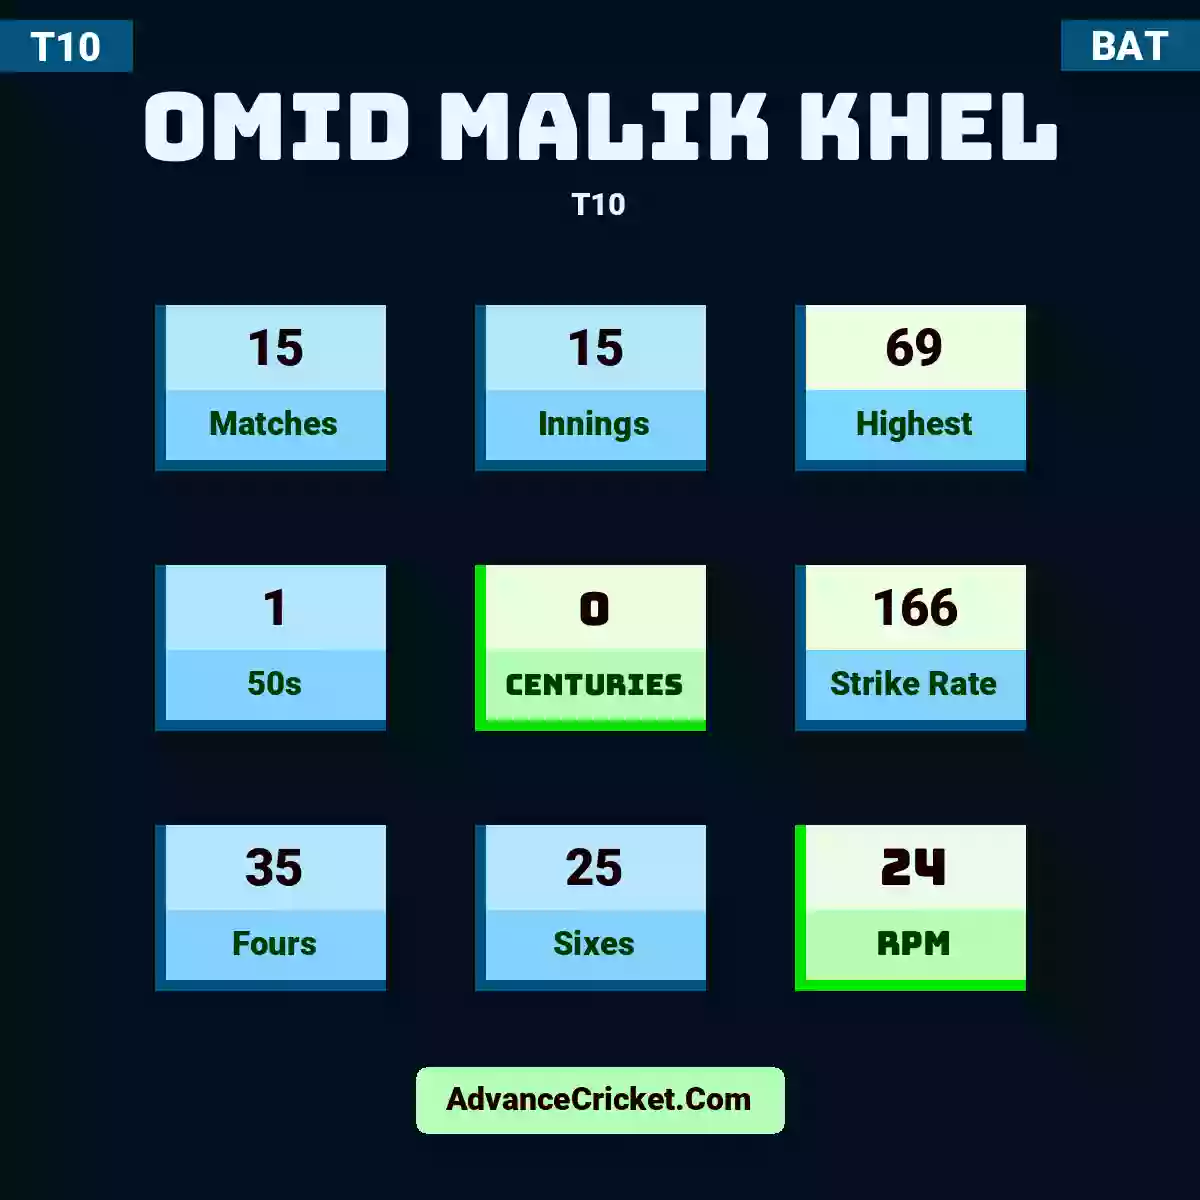 Omid Malik Khel T10 , Omid Malik Khel played 15 matches, scored 69 runs as highest, 1 half-centuries, and 0 centuries, with a strike rate of 166. O.Malik.Khel hit 35 fours and 25 sixes, with an RPM of 24.